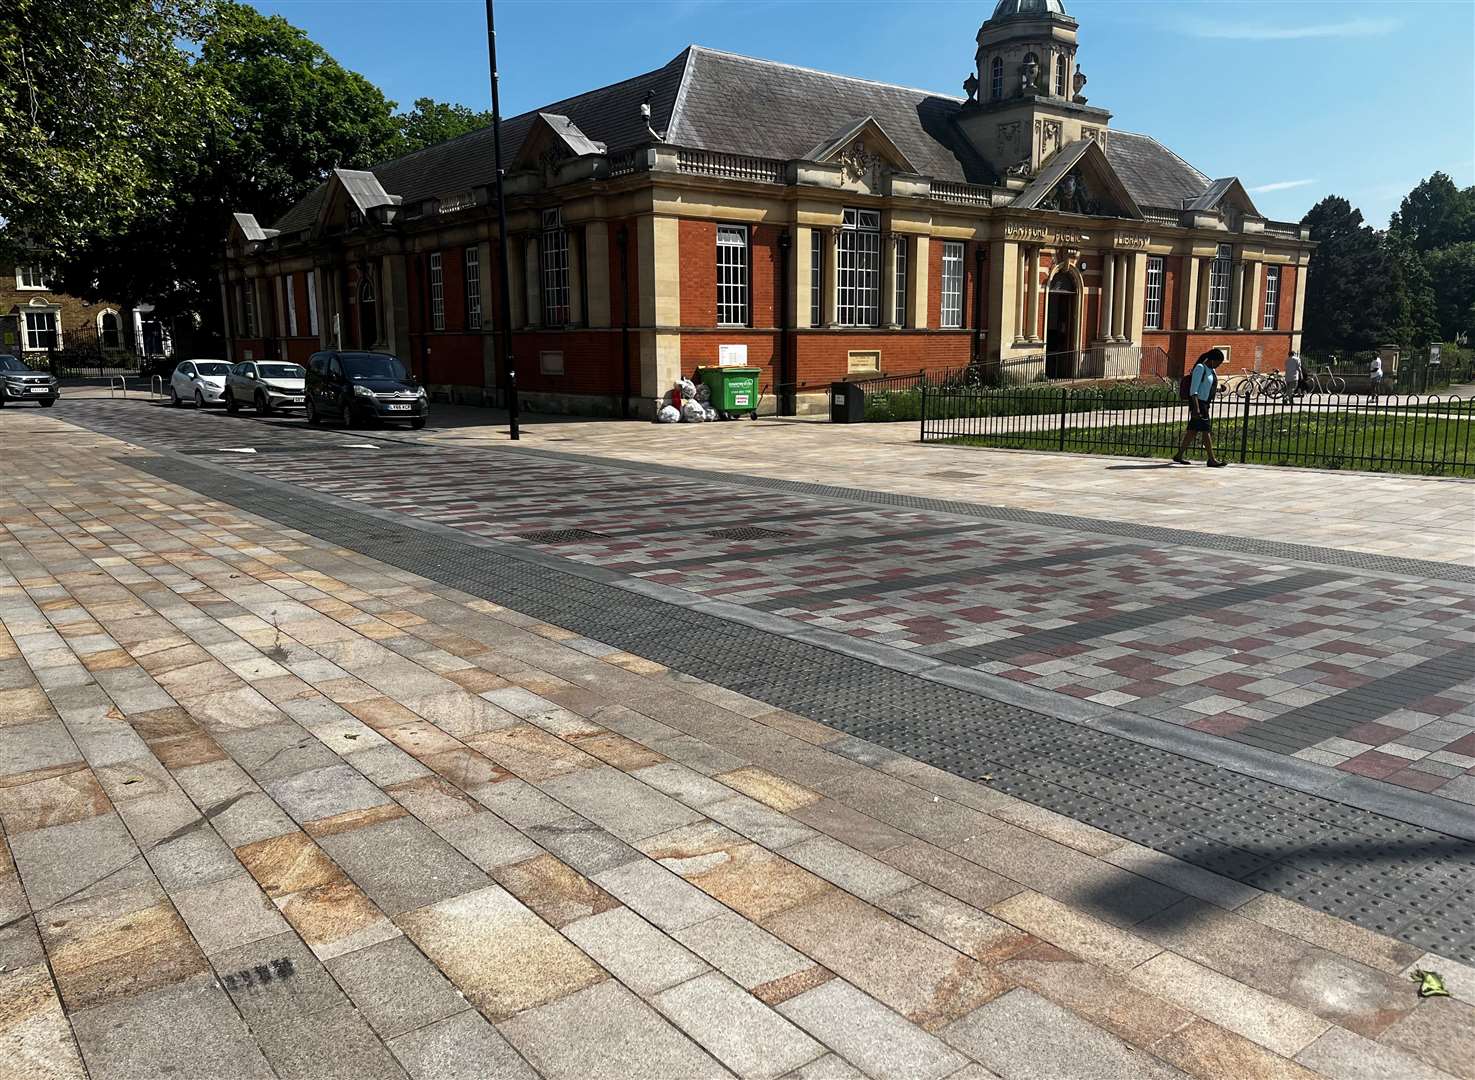 Market Street has no official pedestrian crossing near Dartford library and the entrance to Central Park